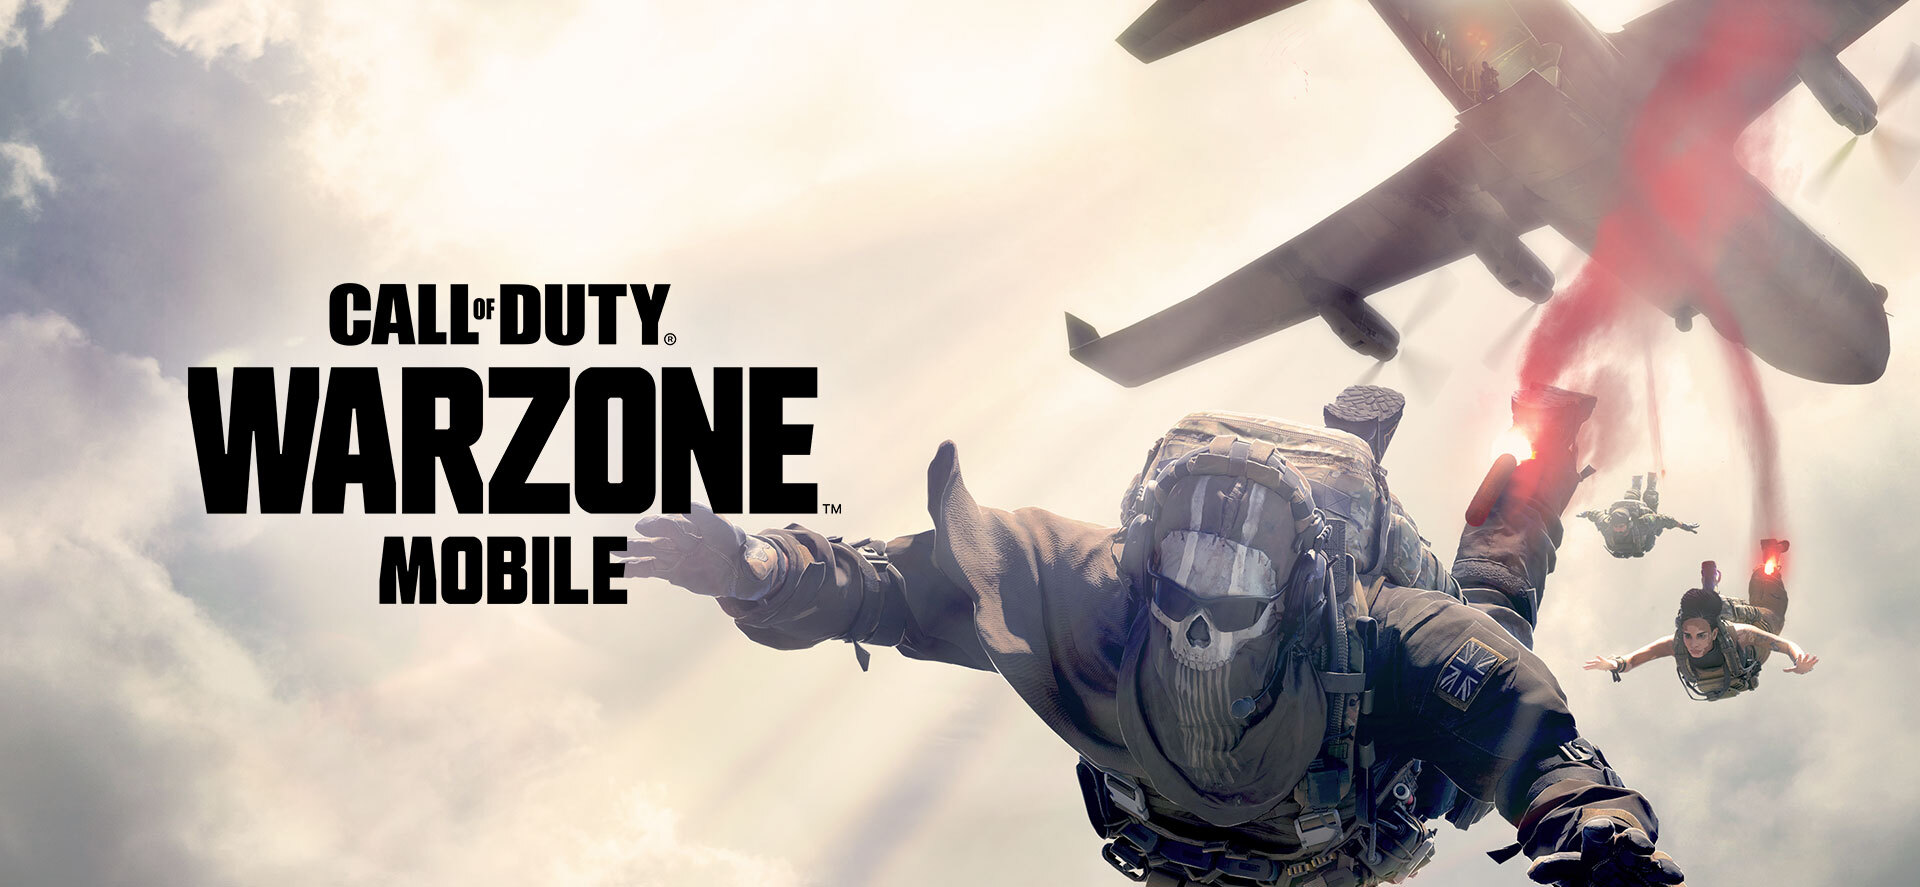 Call of Duty Warzone Mobile - Reveal Trailer 